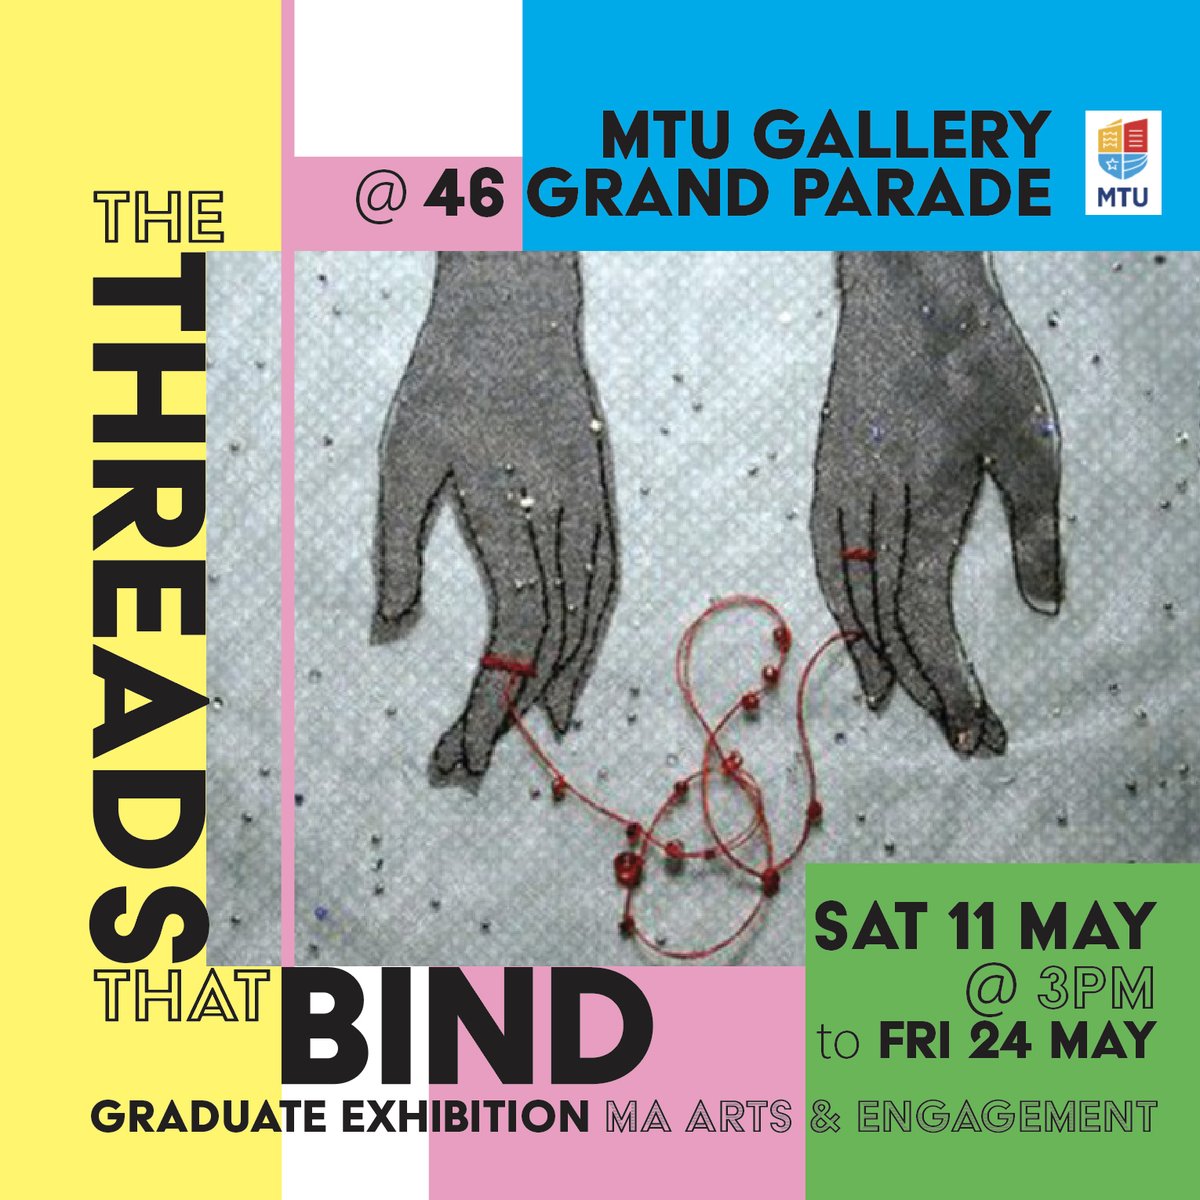 'The Threads That Bind' features work by MTU Crawford @maartsandengagement students. Opening in @mtugalleryat46grandparade Saturday @ 3pm May 11th. All welcome! Featuring work that explores the role of the arts in the social context. The exhibition will run until May 24th.